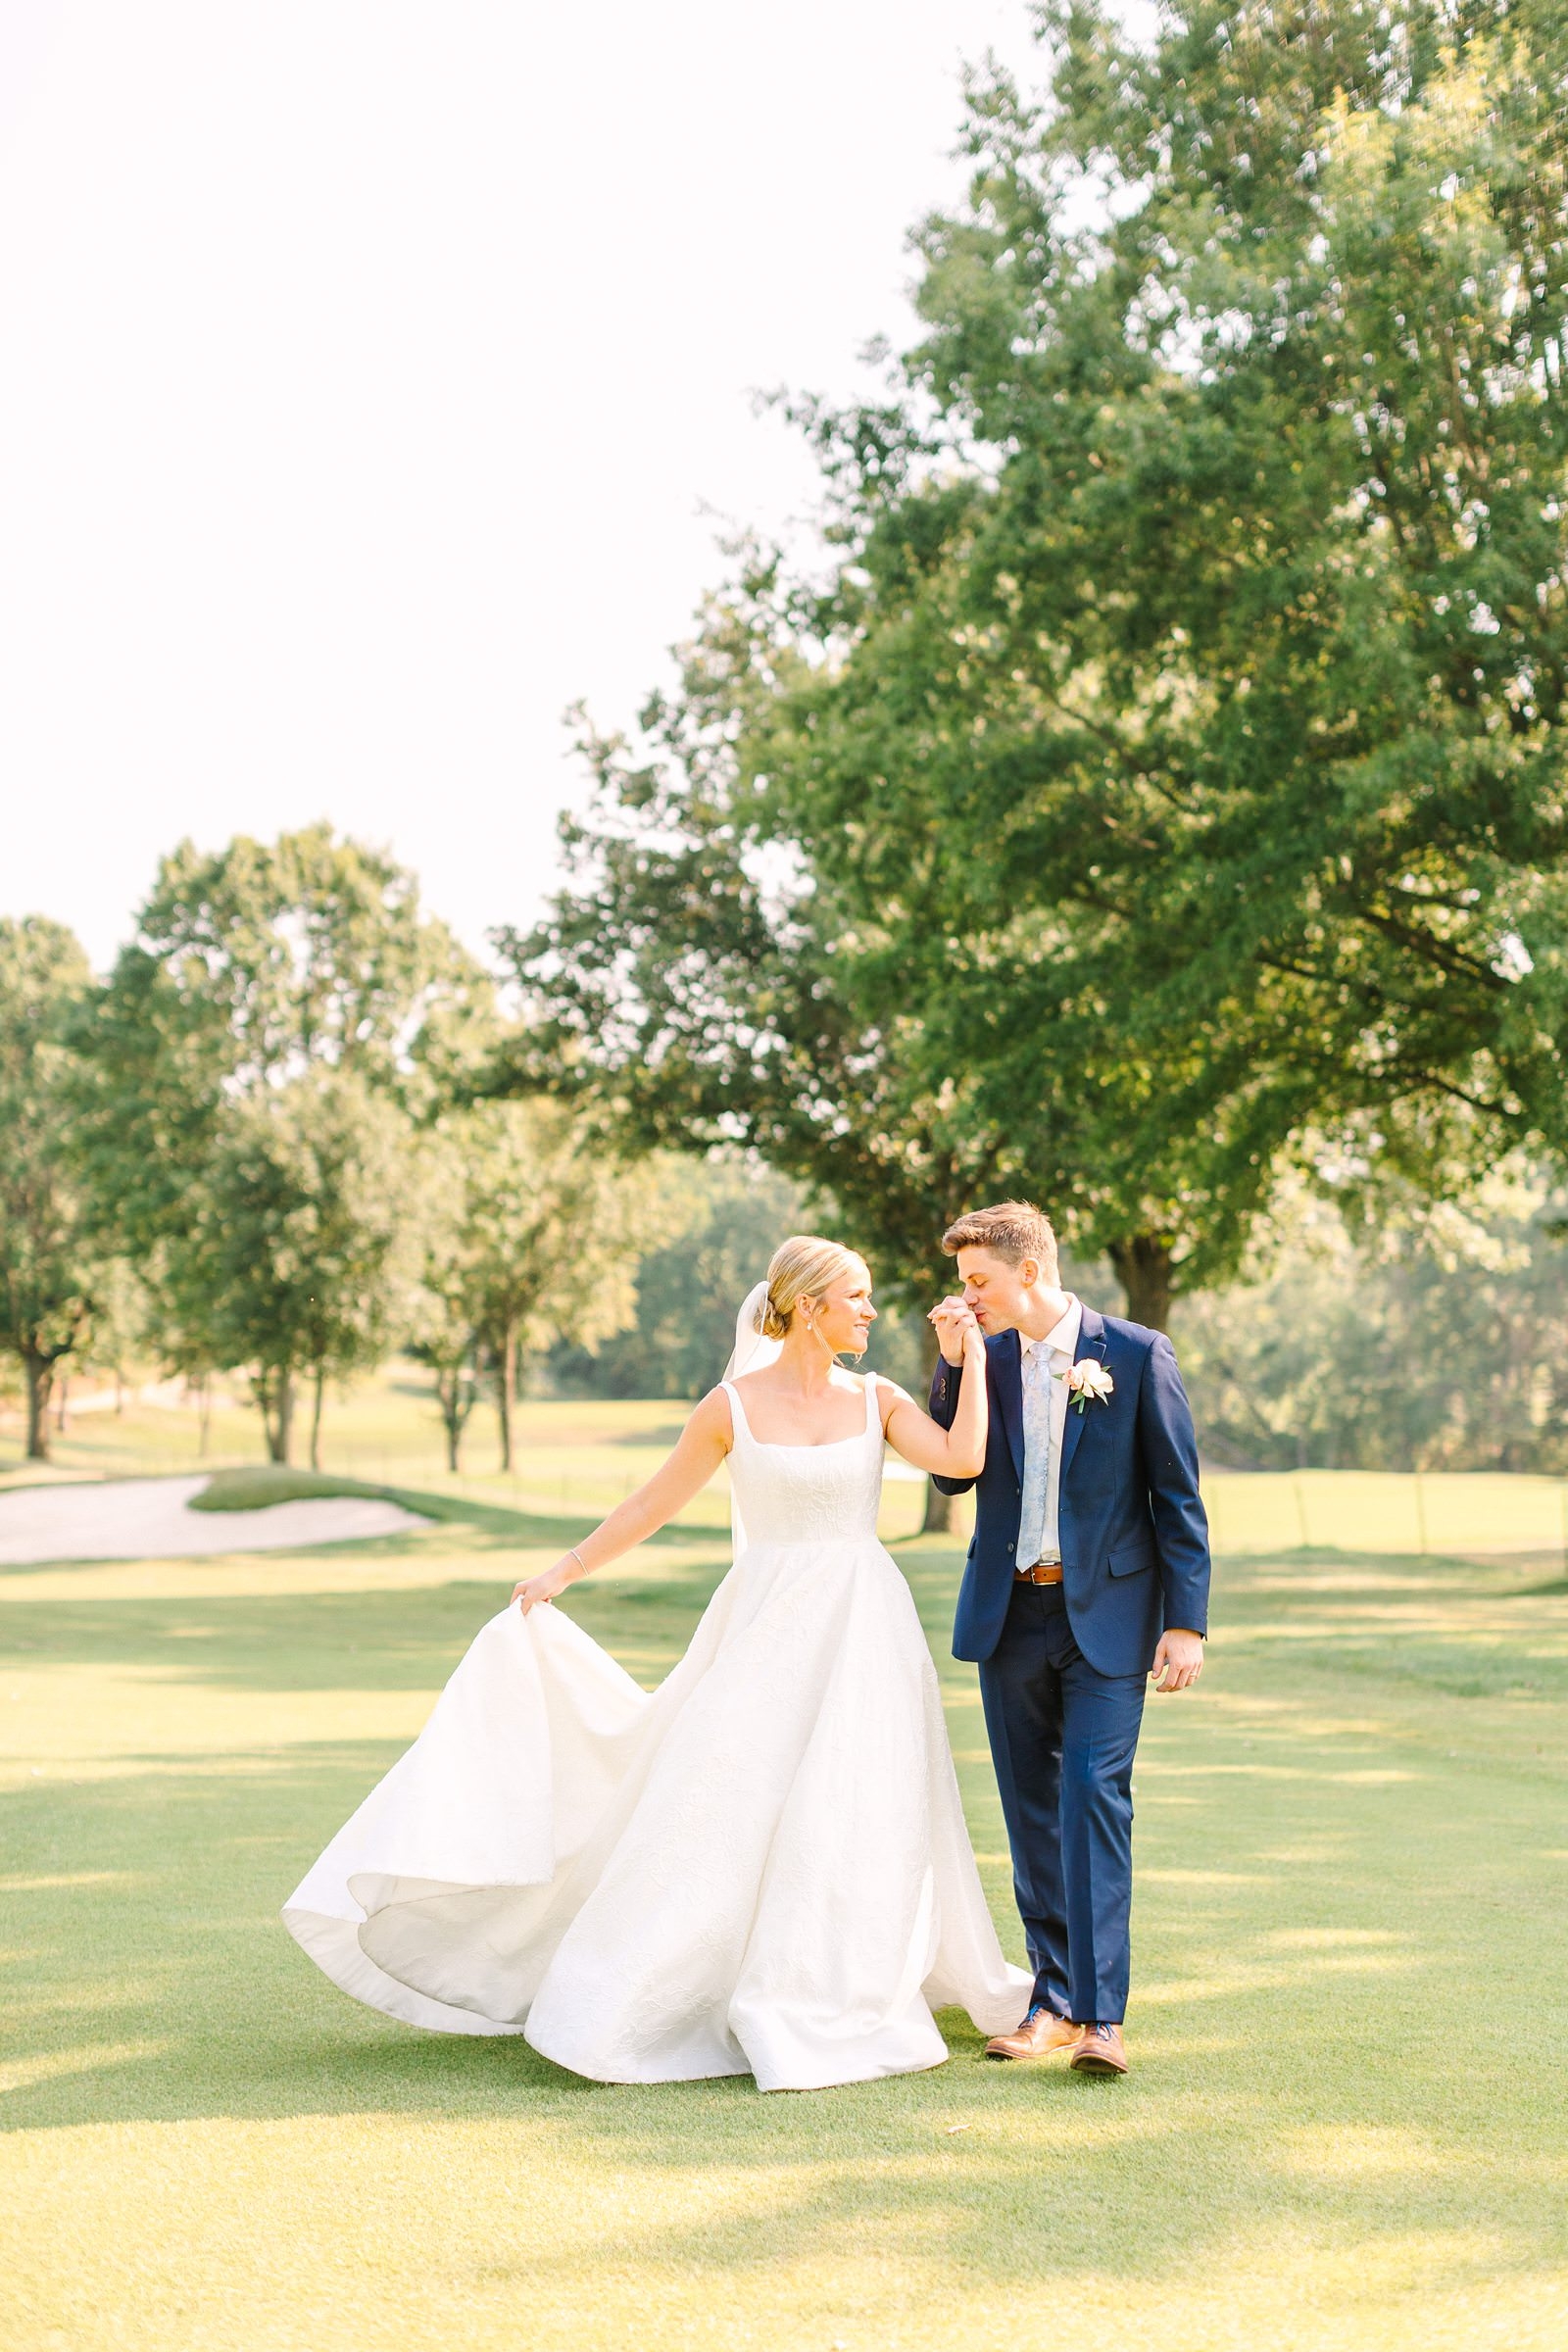 An Evansville Country Club Wedding | Ashley and Beau | Bret and Brandie Photography167.jpg